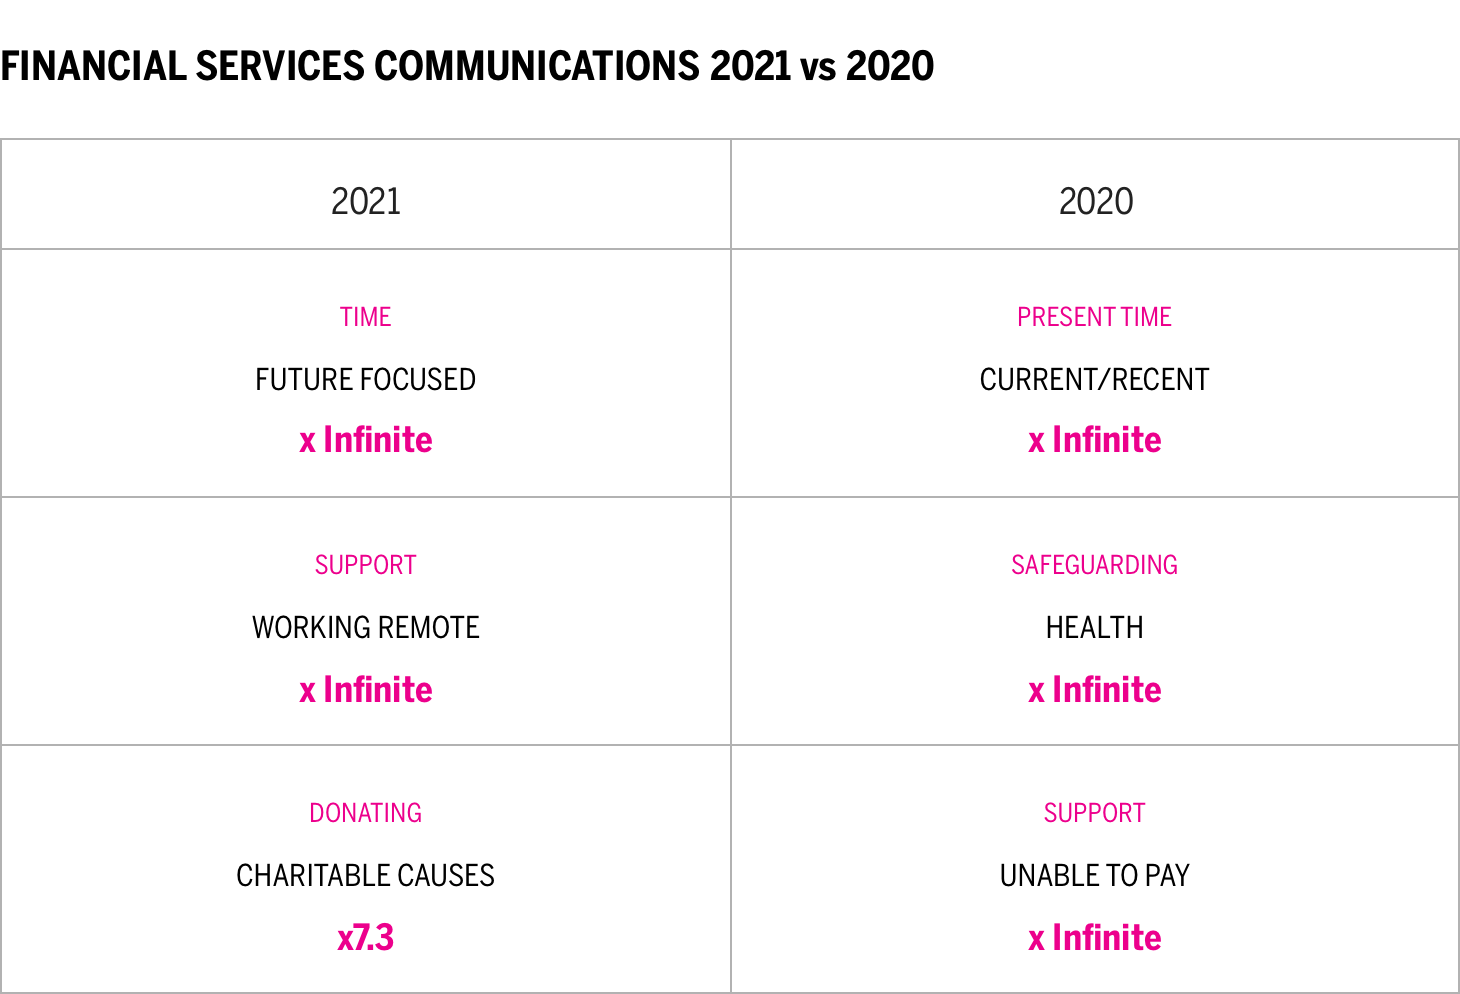 FINANCIAL SERVICES COMMUNICATIONS 2021 vs 2020 Chart